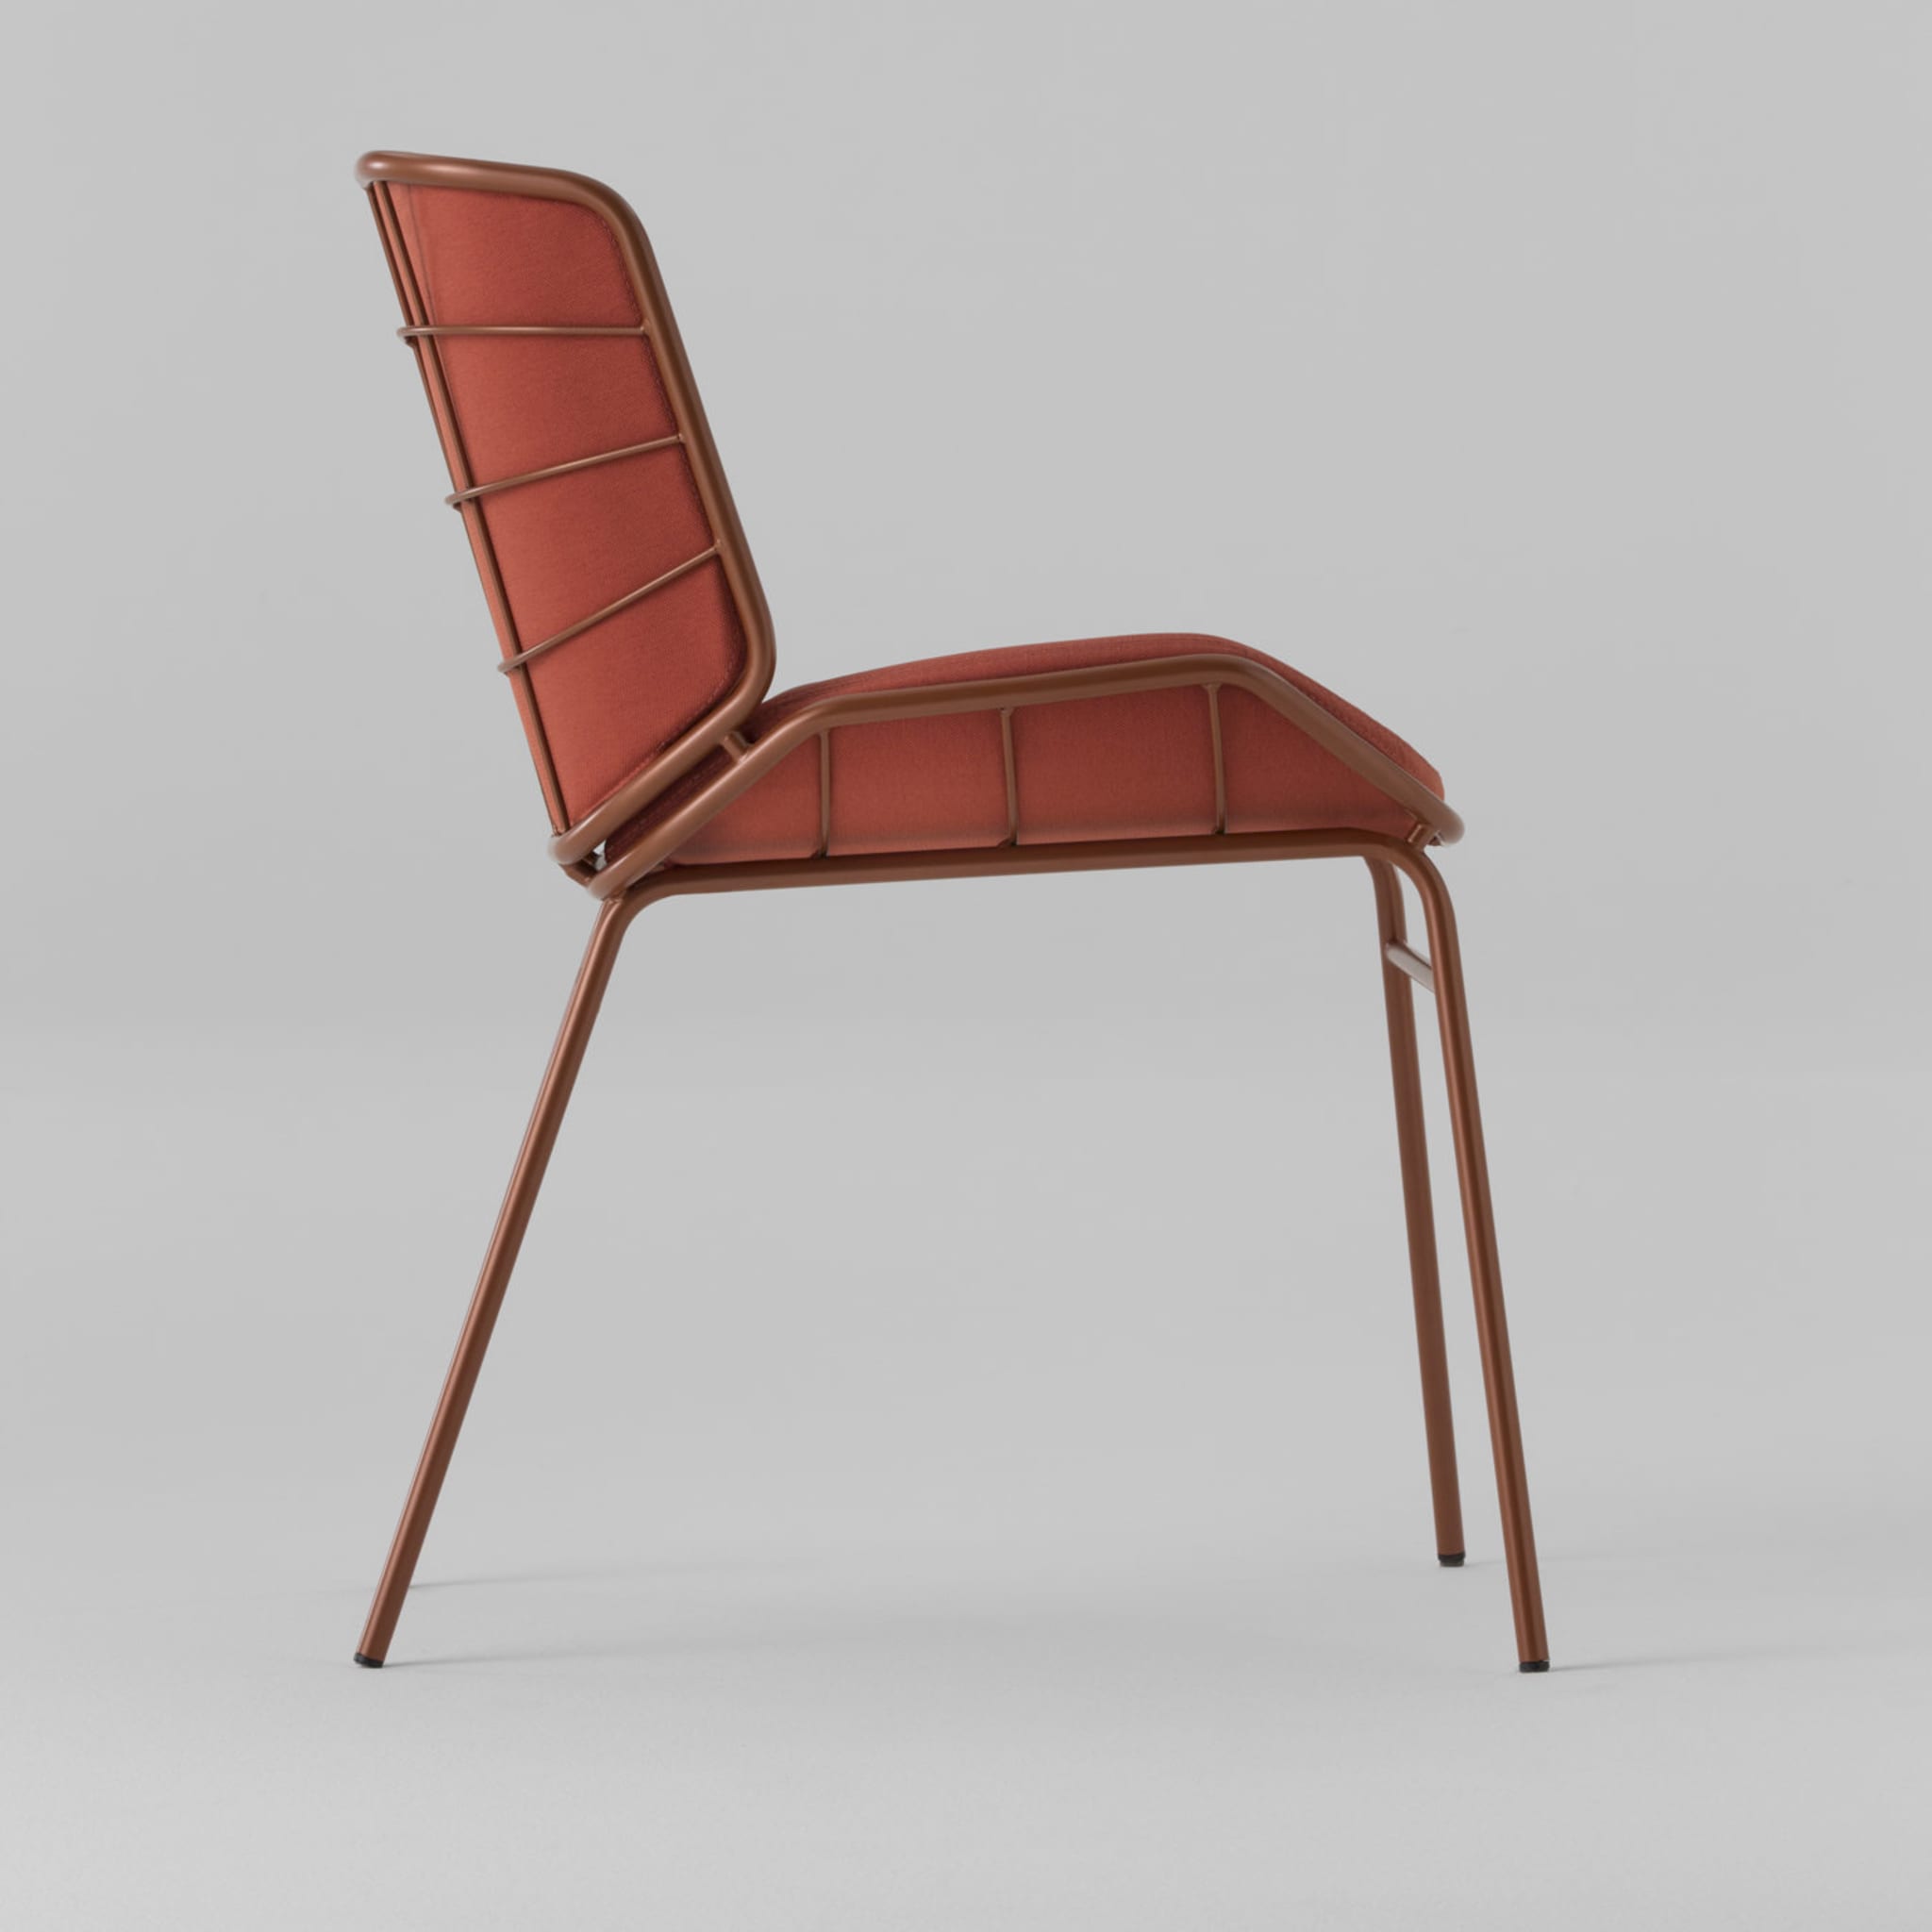 Skin Met Red Chair By Giacomo Cattani - Alternative view 3